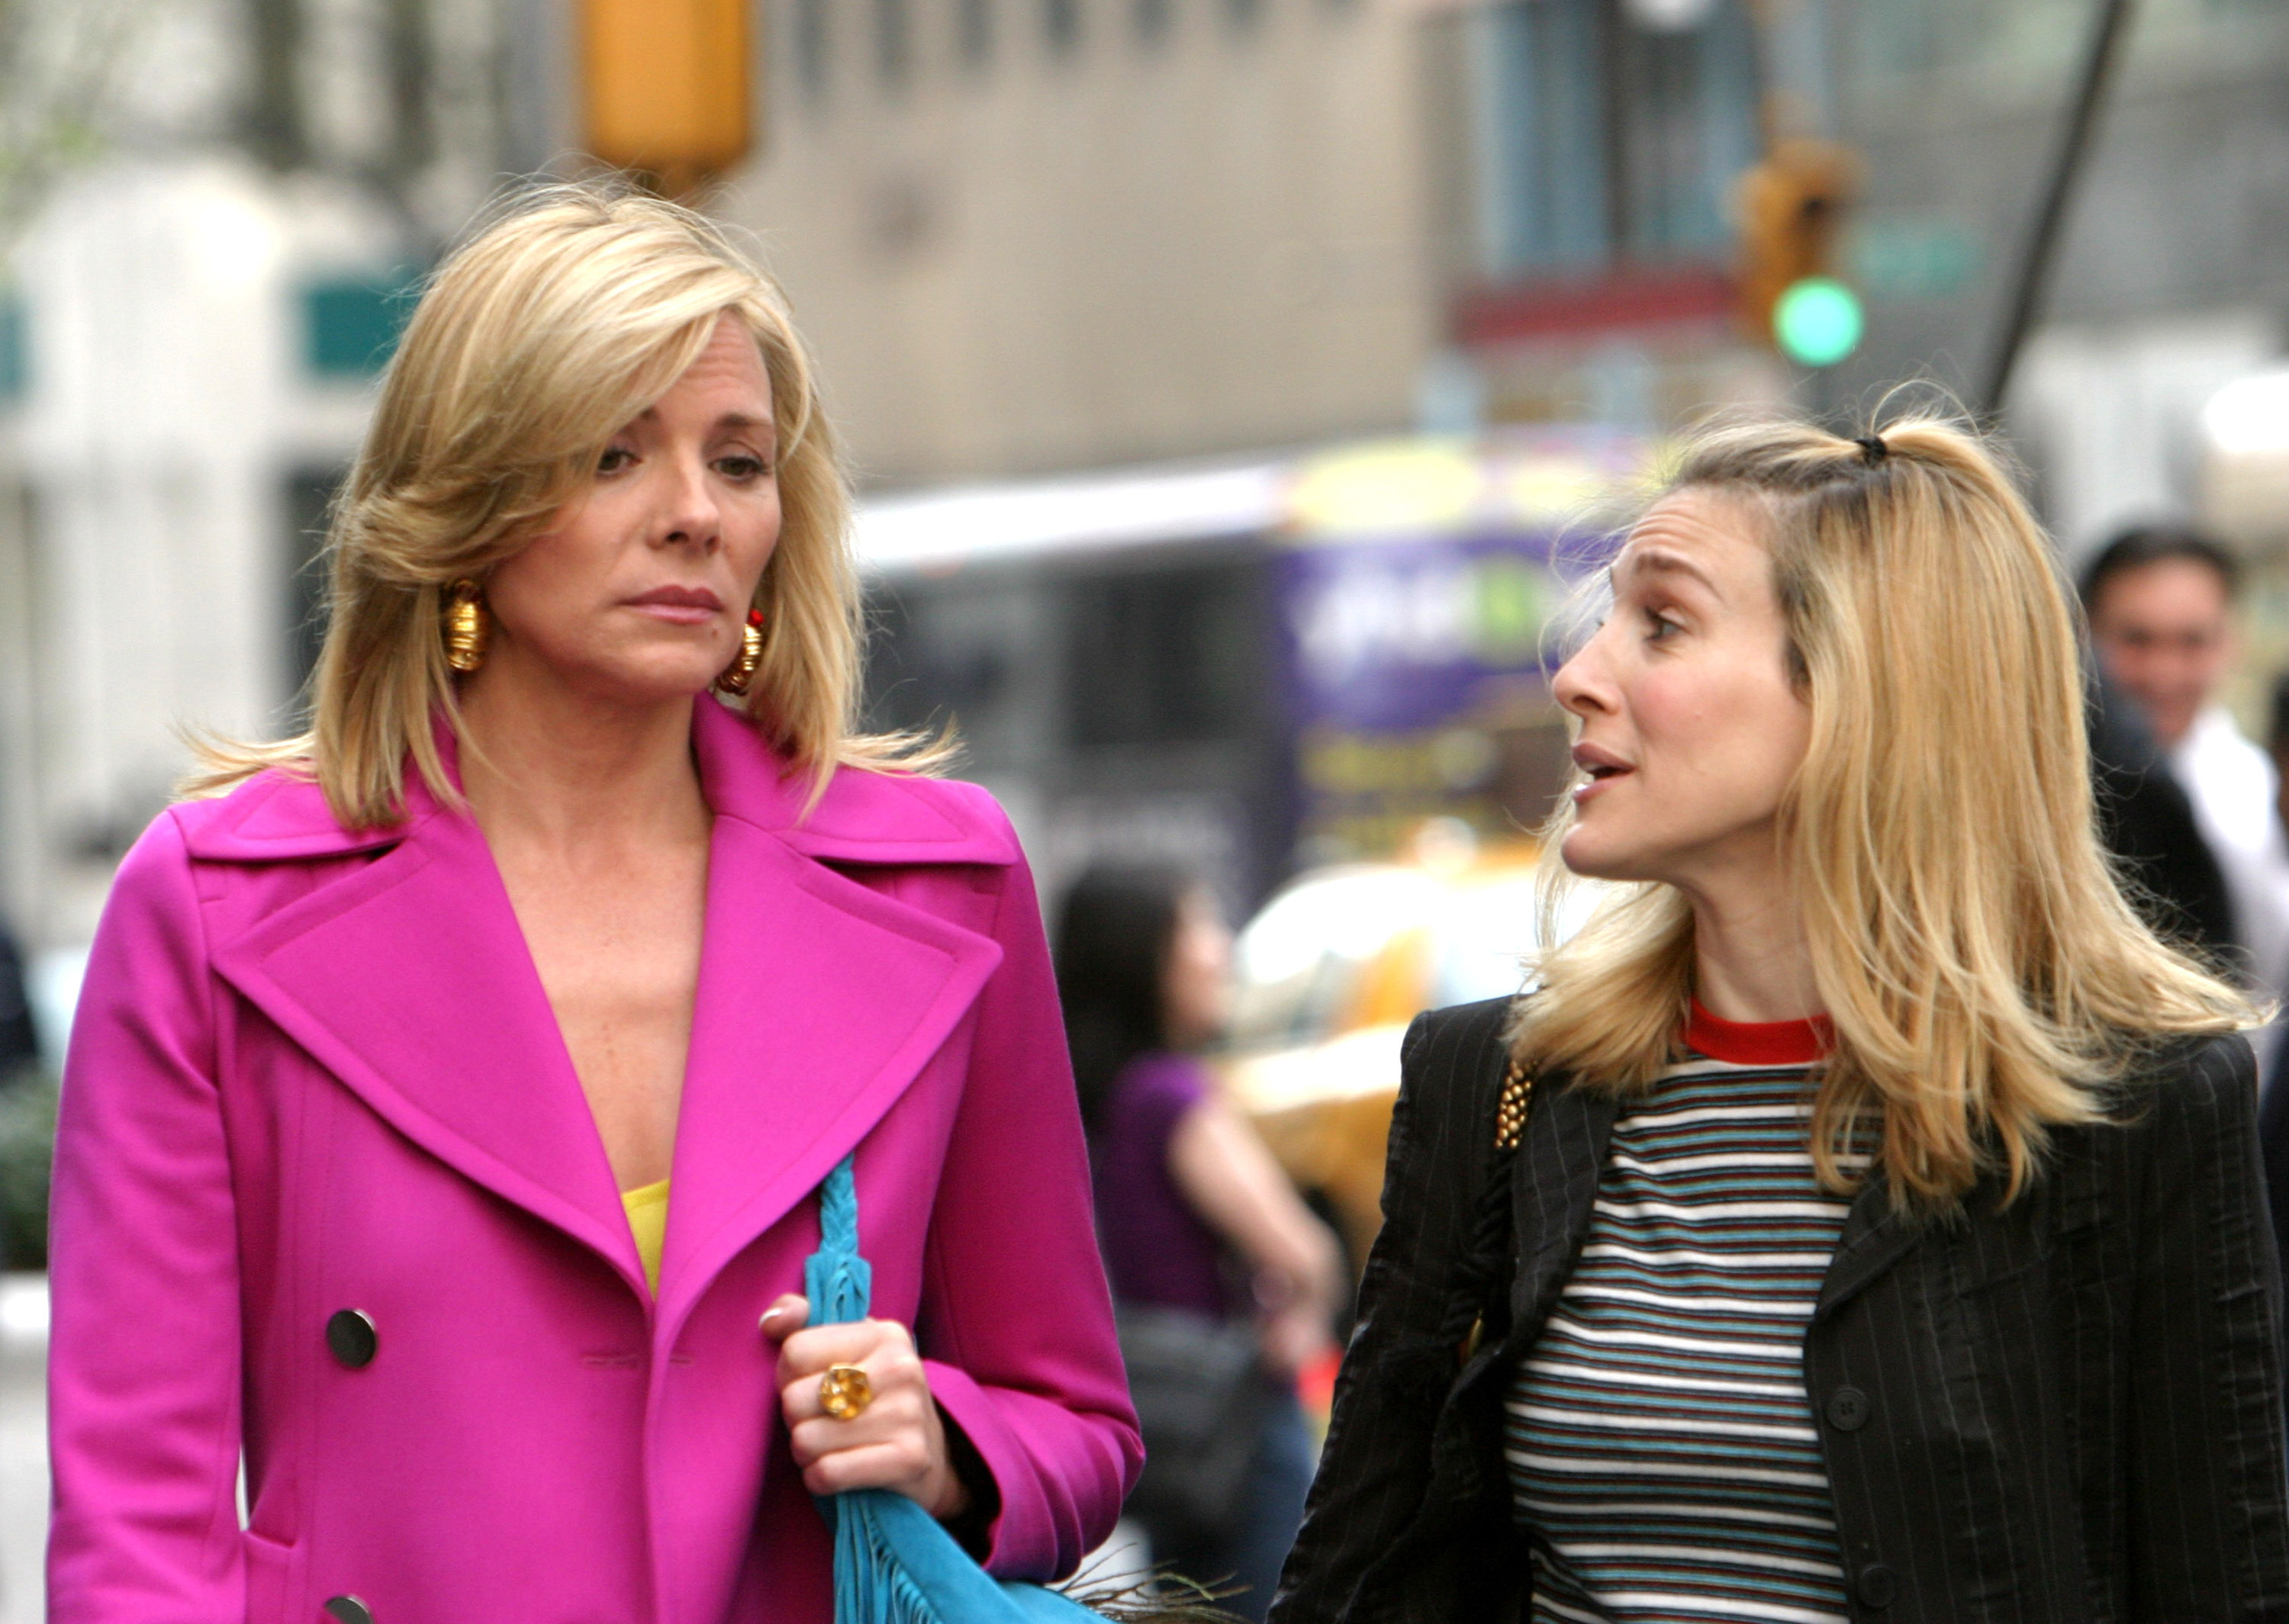 Kim Cattrall as Samantha Jones and Sarah Jessica Parker on location for 'Sex and the City'